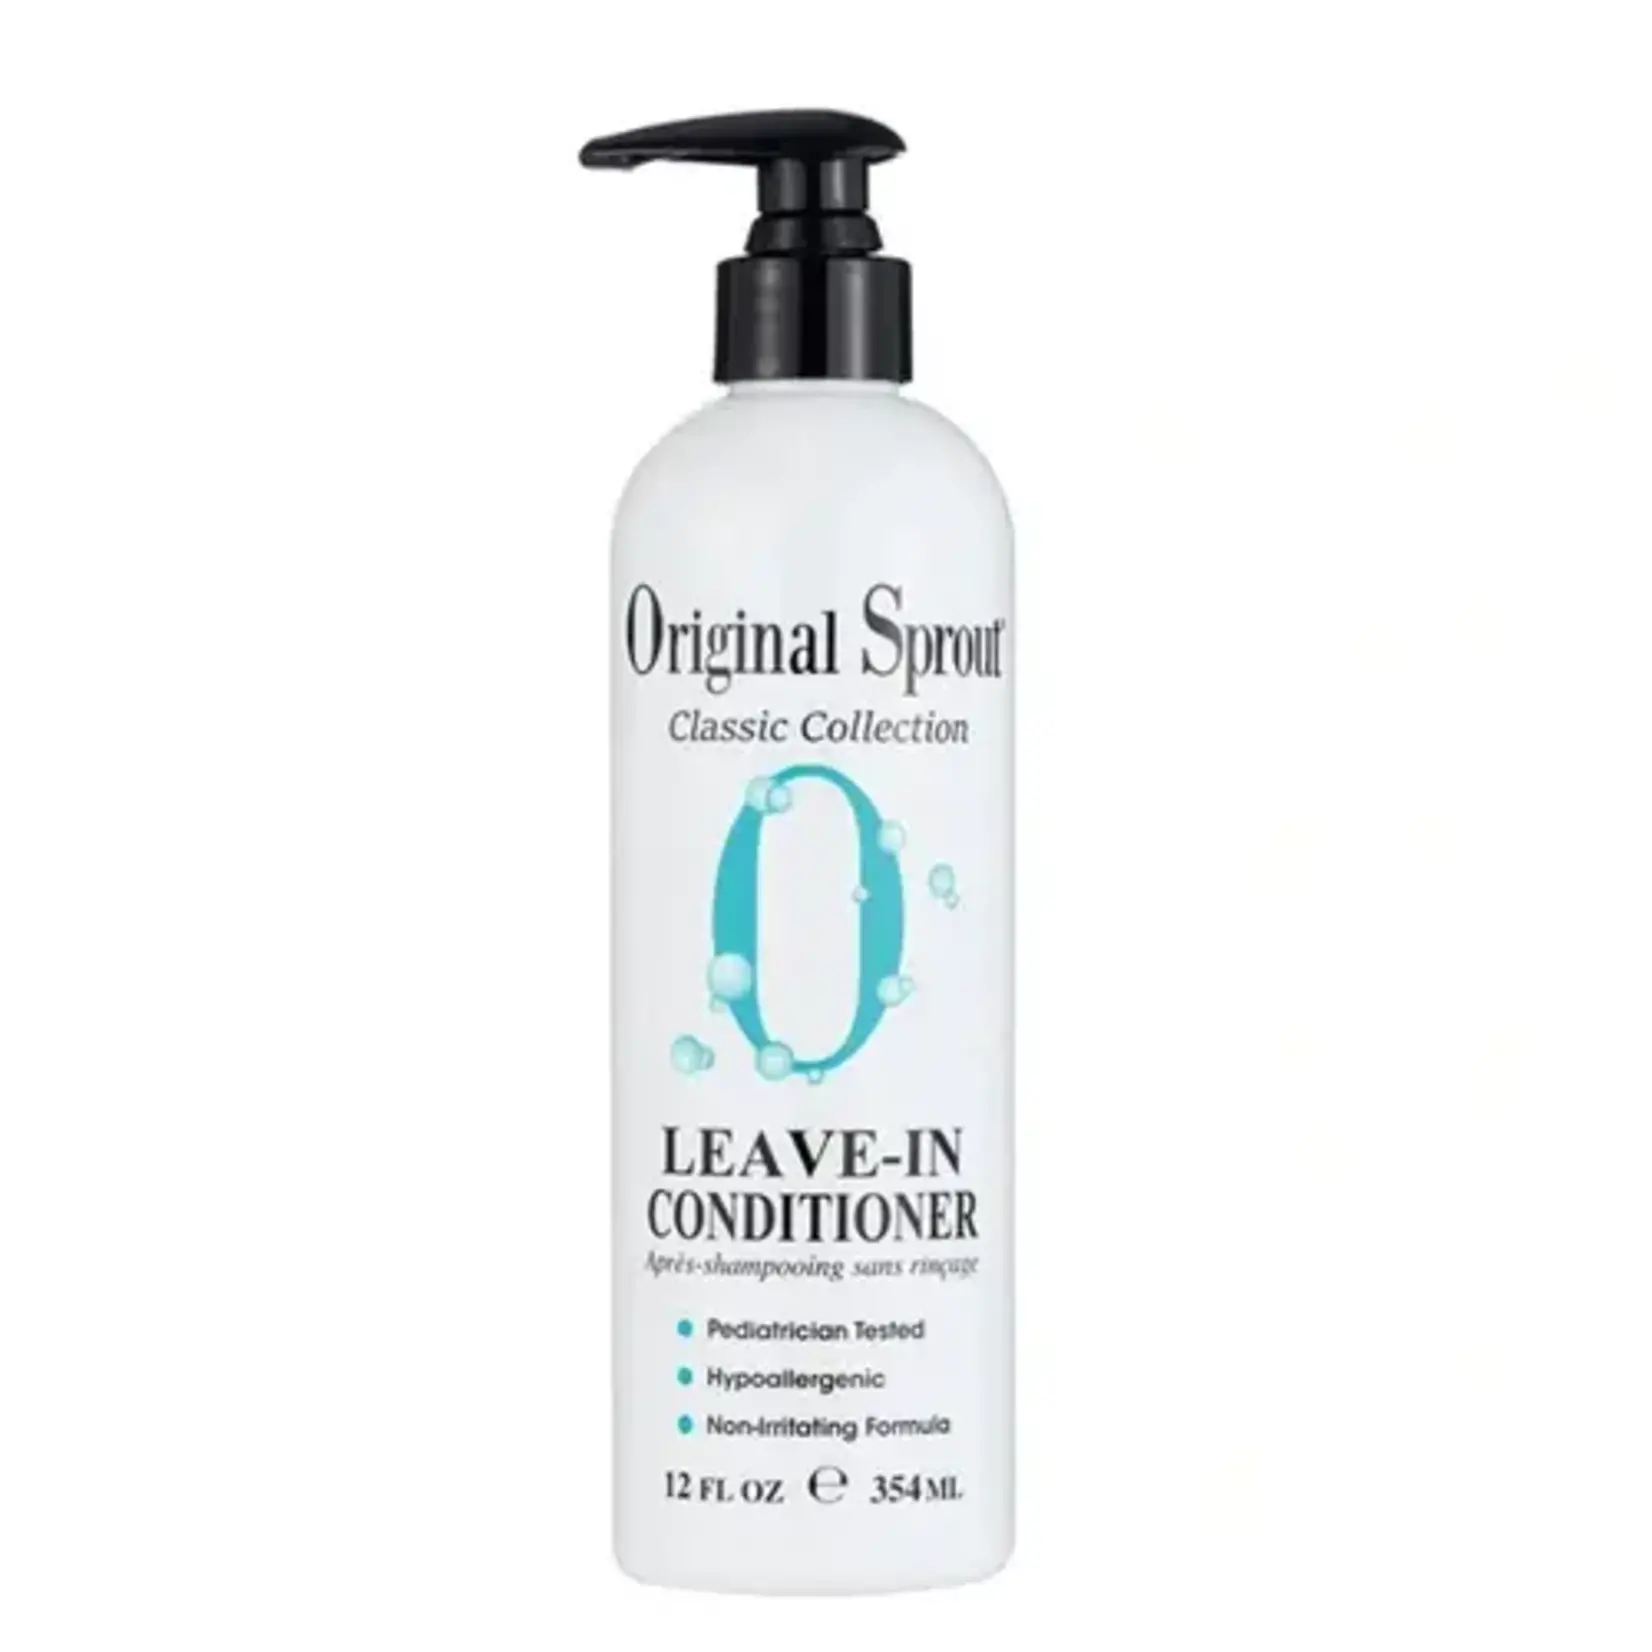 Original Sprout ORIGINAL SPROUT LEAVE-IN CONDITIONERS